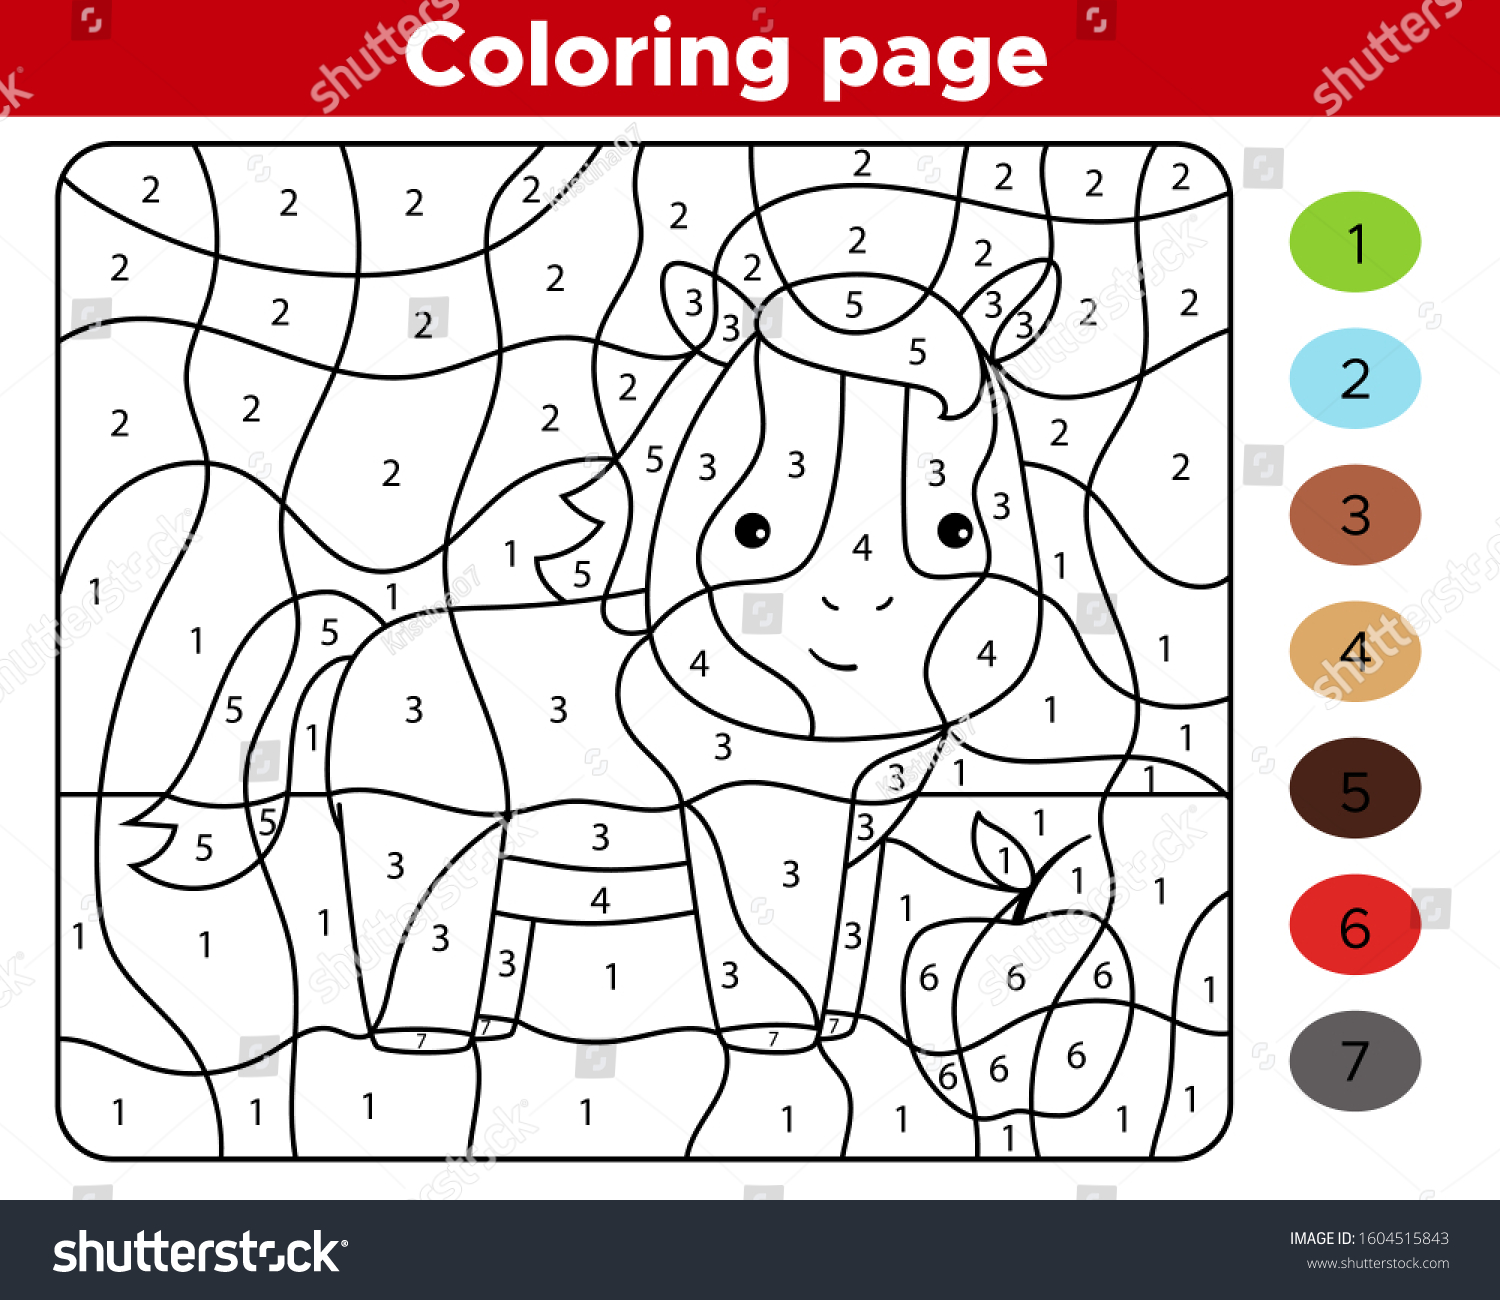 color by numbers educational game preschool stock vector royalty free 1604515843 shutterstock